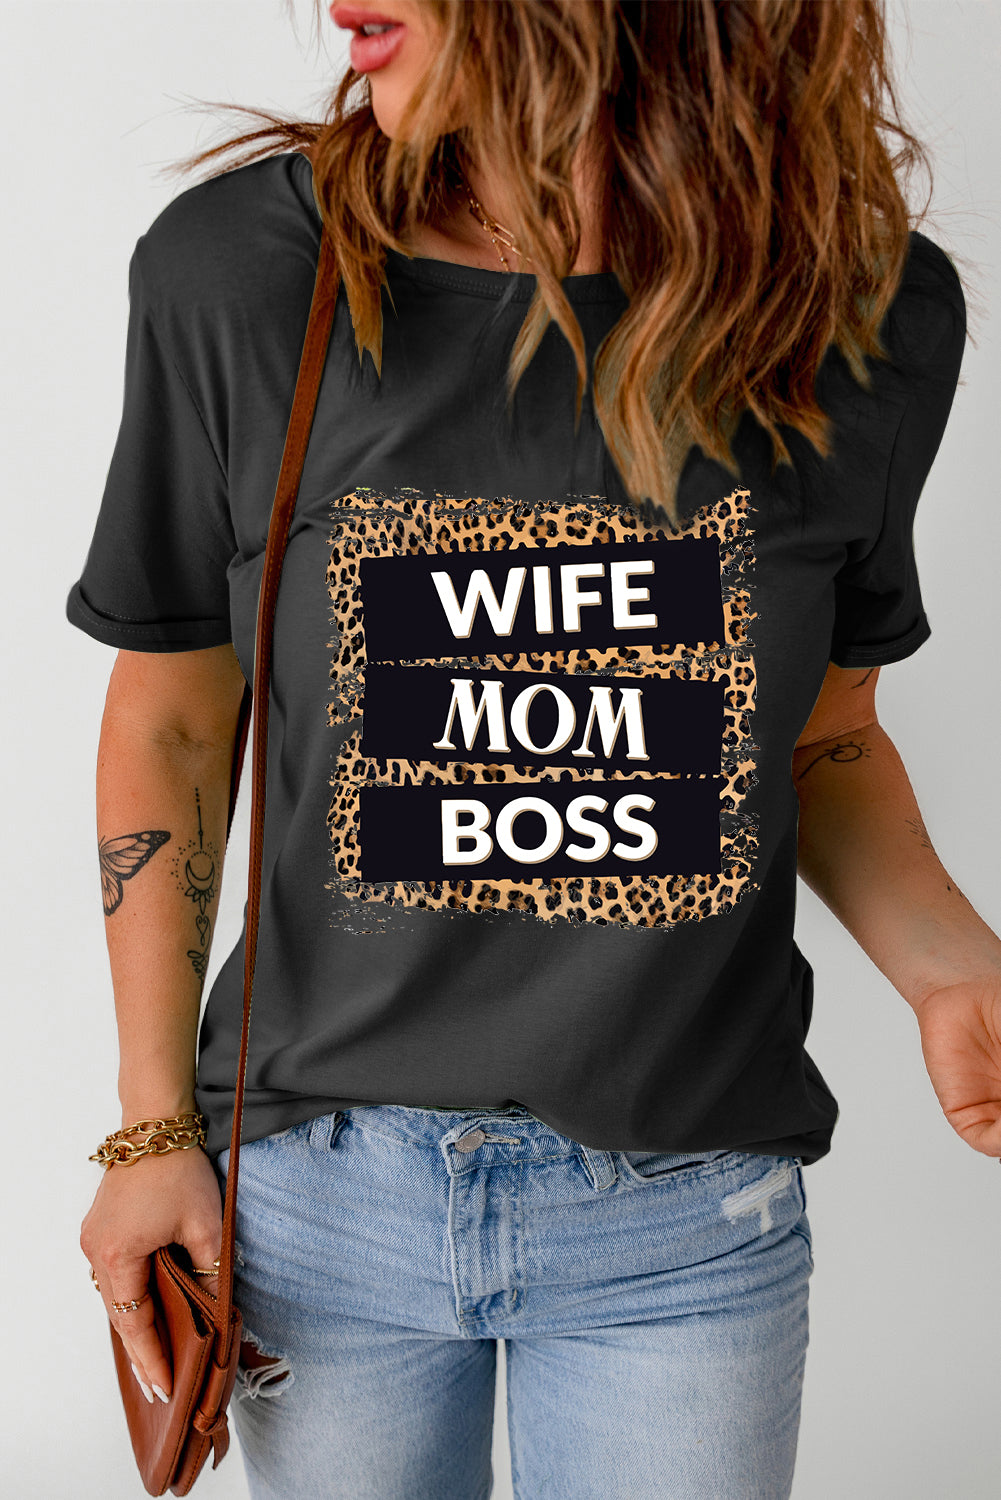 WIFE MOM BOSS Leopard Graphic Tee  Krazy Heart Designs Boutique Black S 